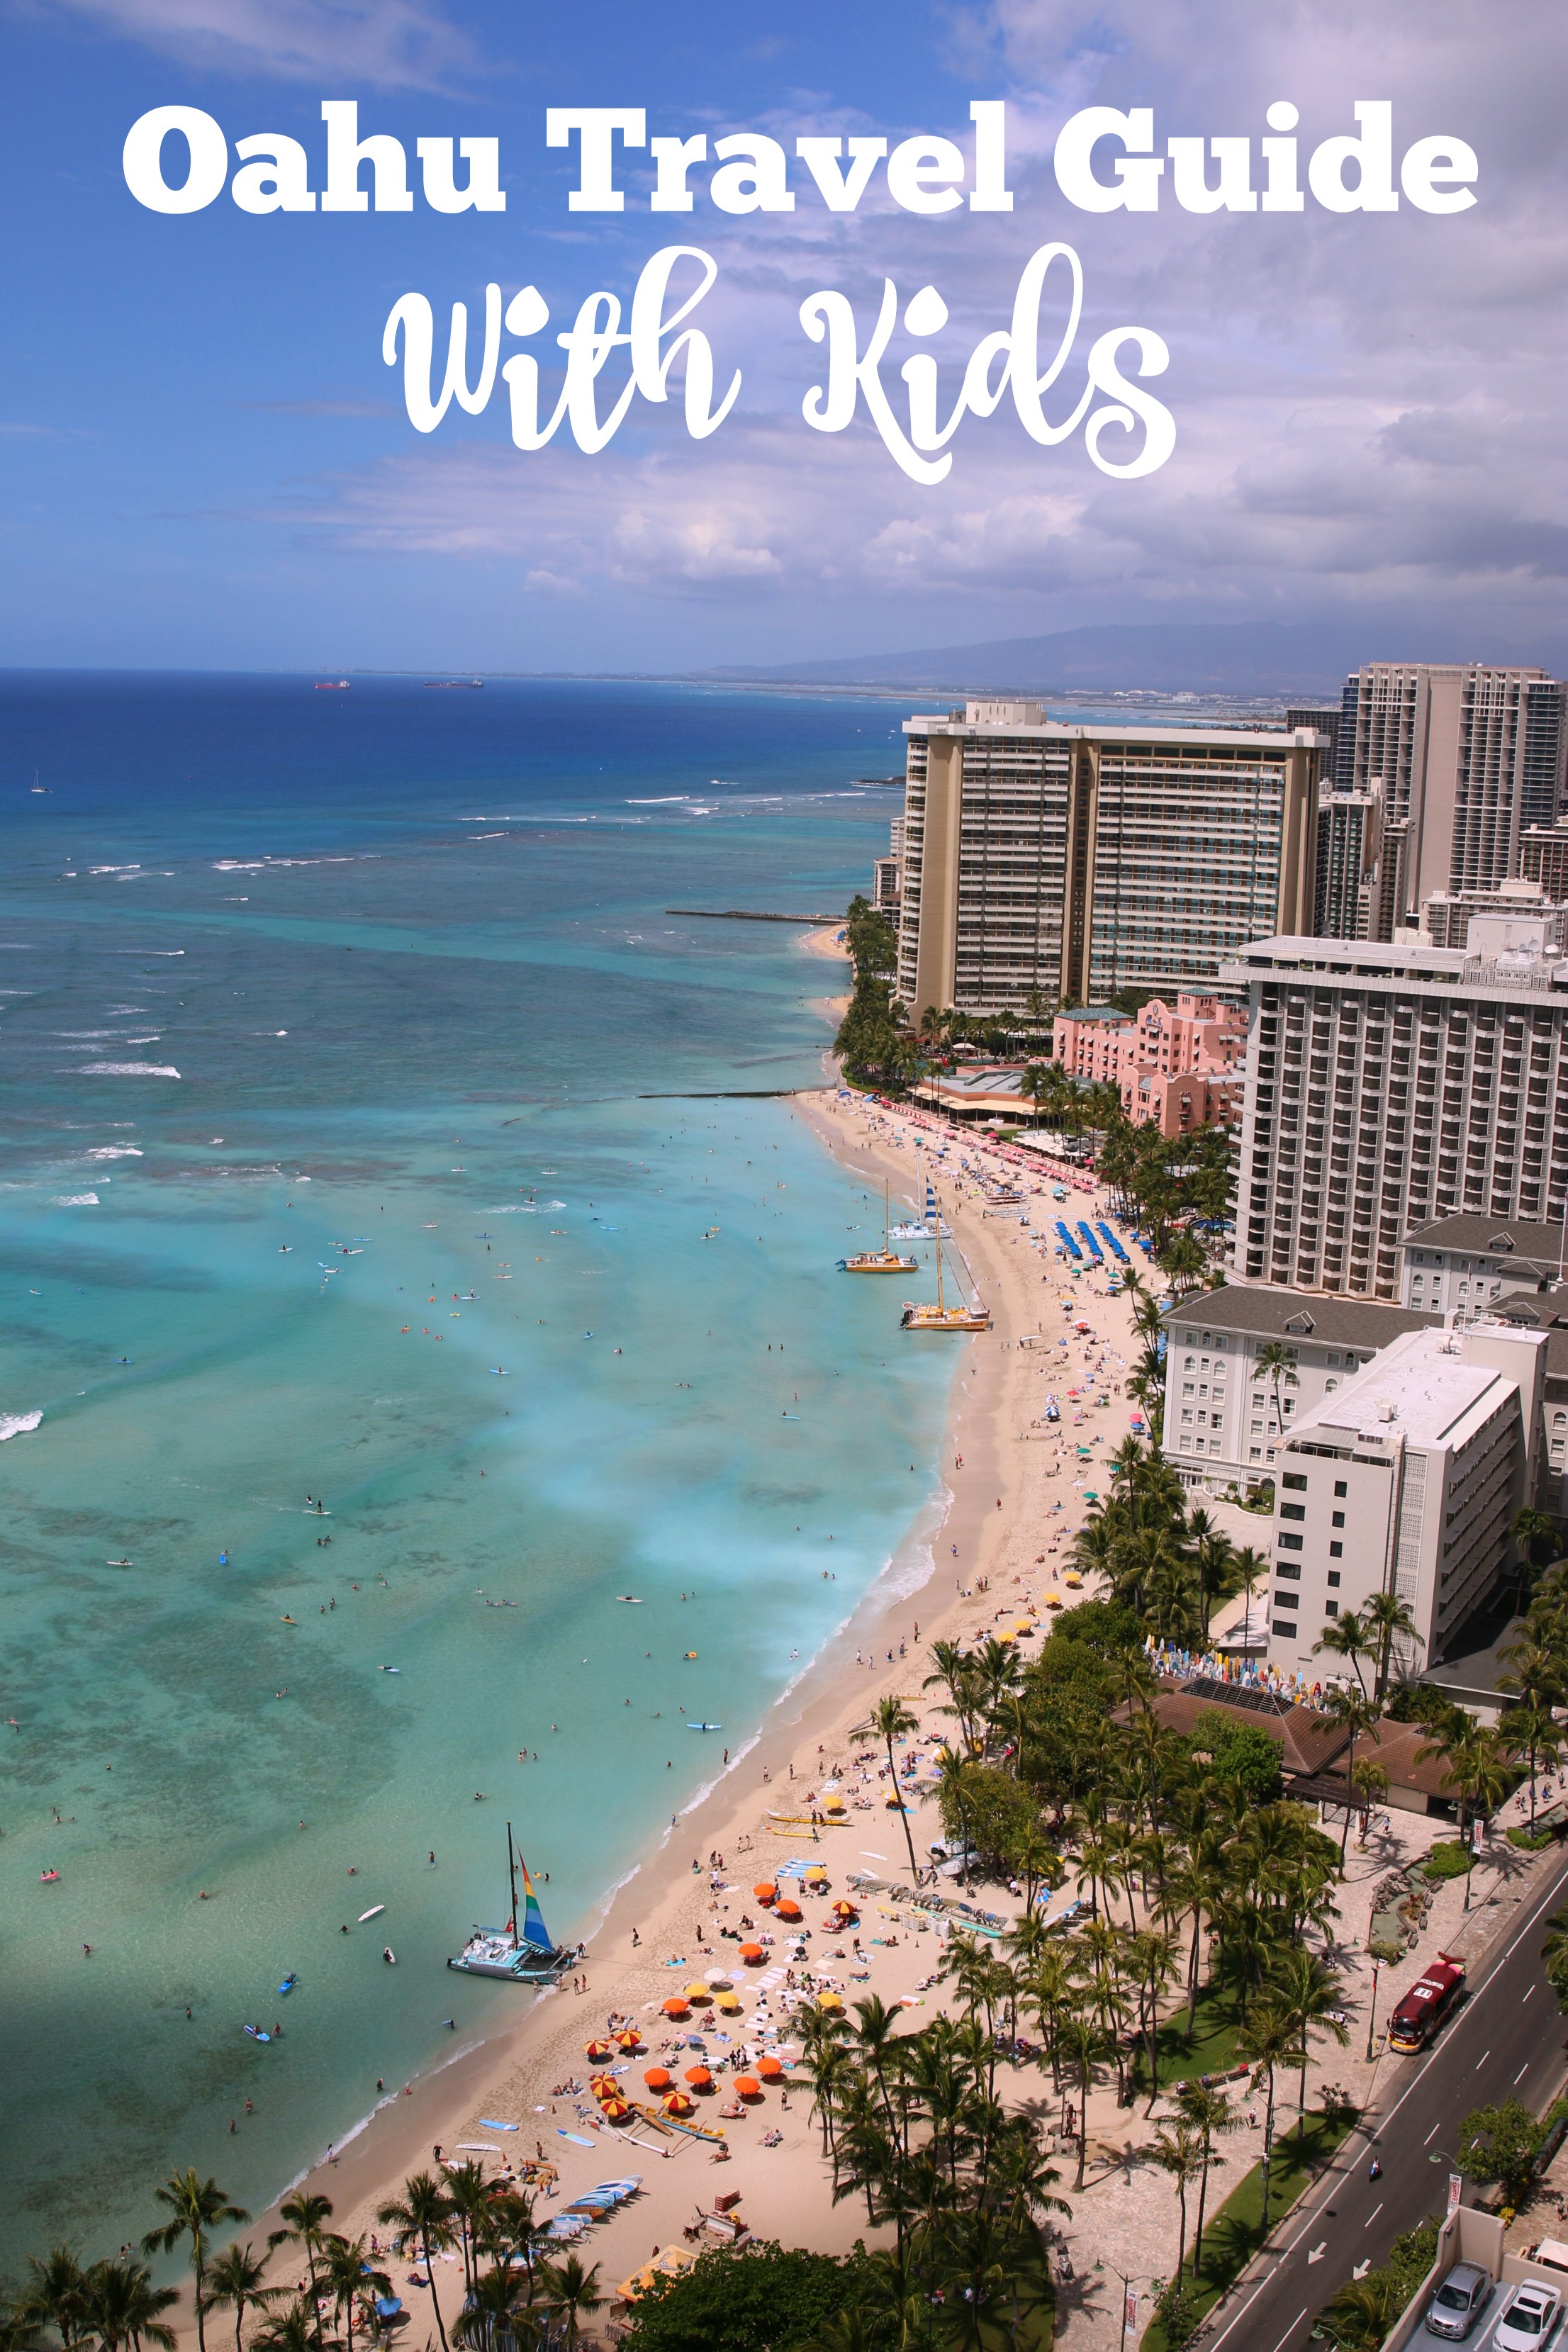 Oahu Luxury Family Travel Guide It's a Lovely Life!